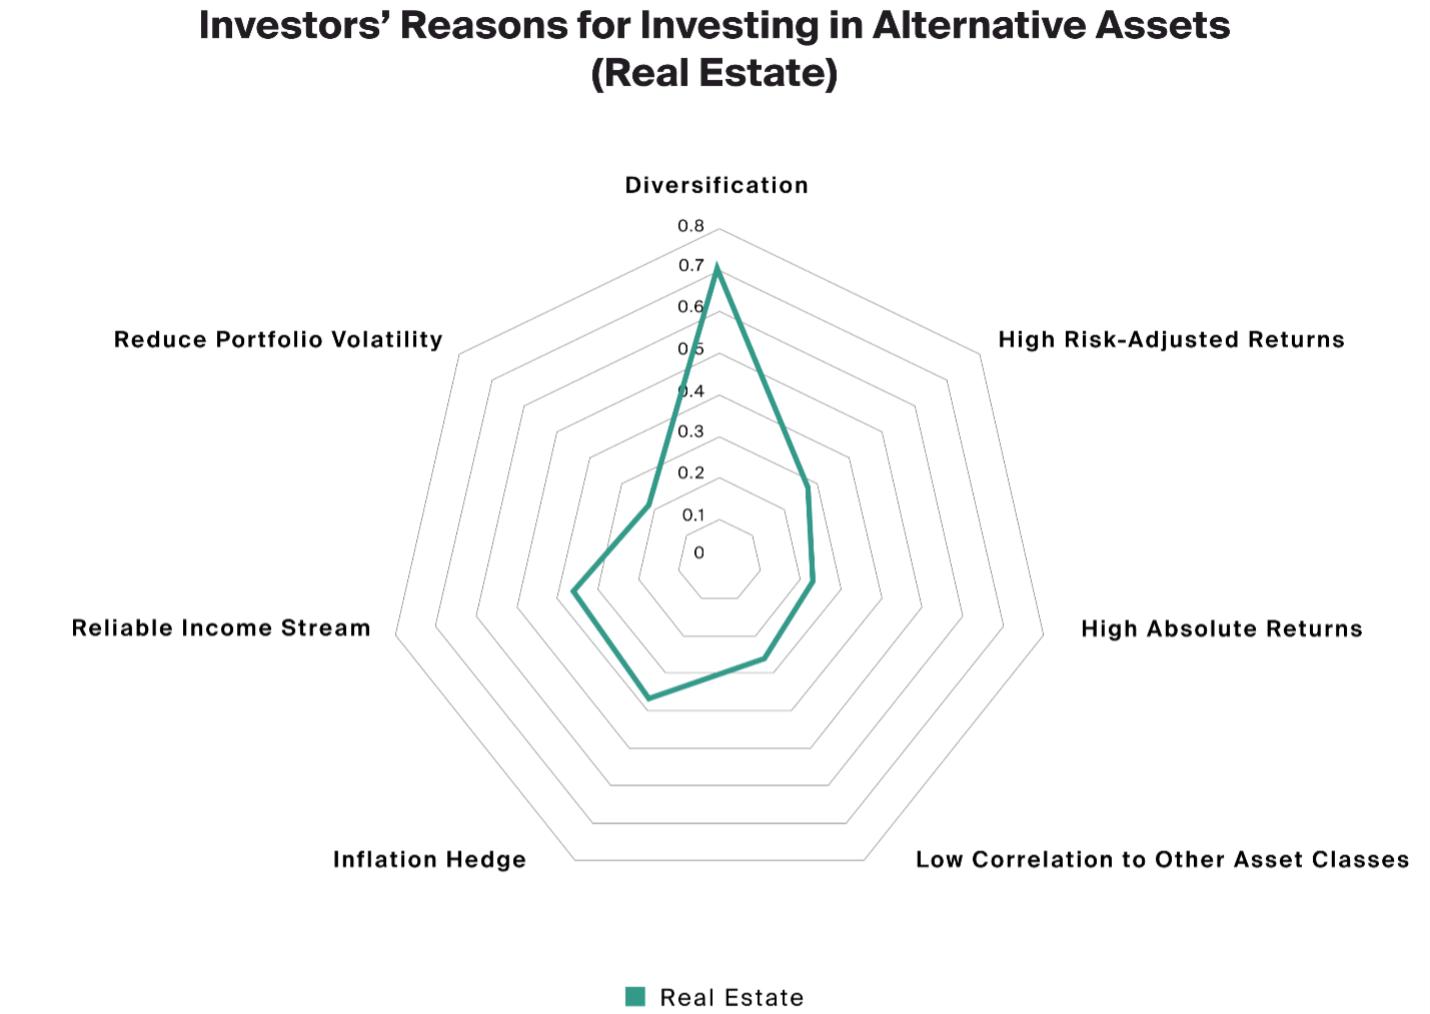 Exhibit 2: Diversification, income and inflation protection are some of the reasons investors tend to allocate to real estate